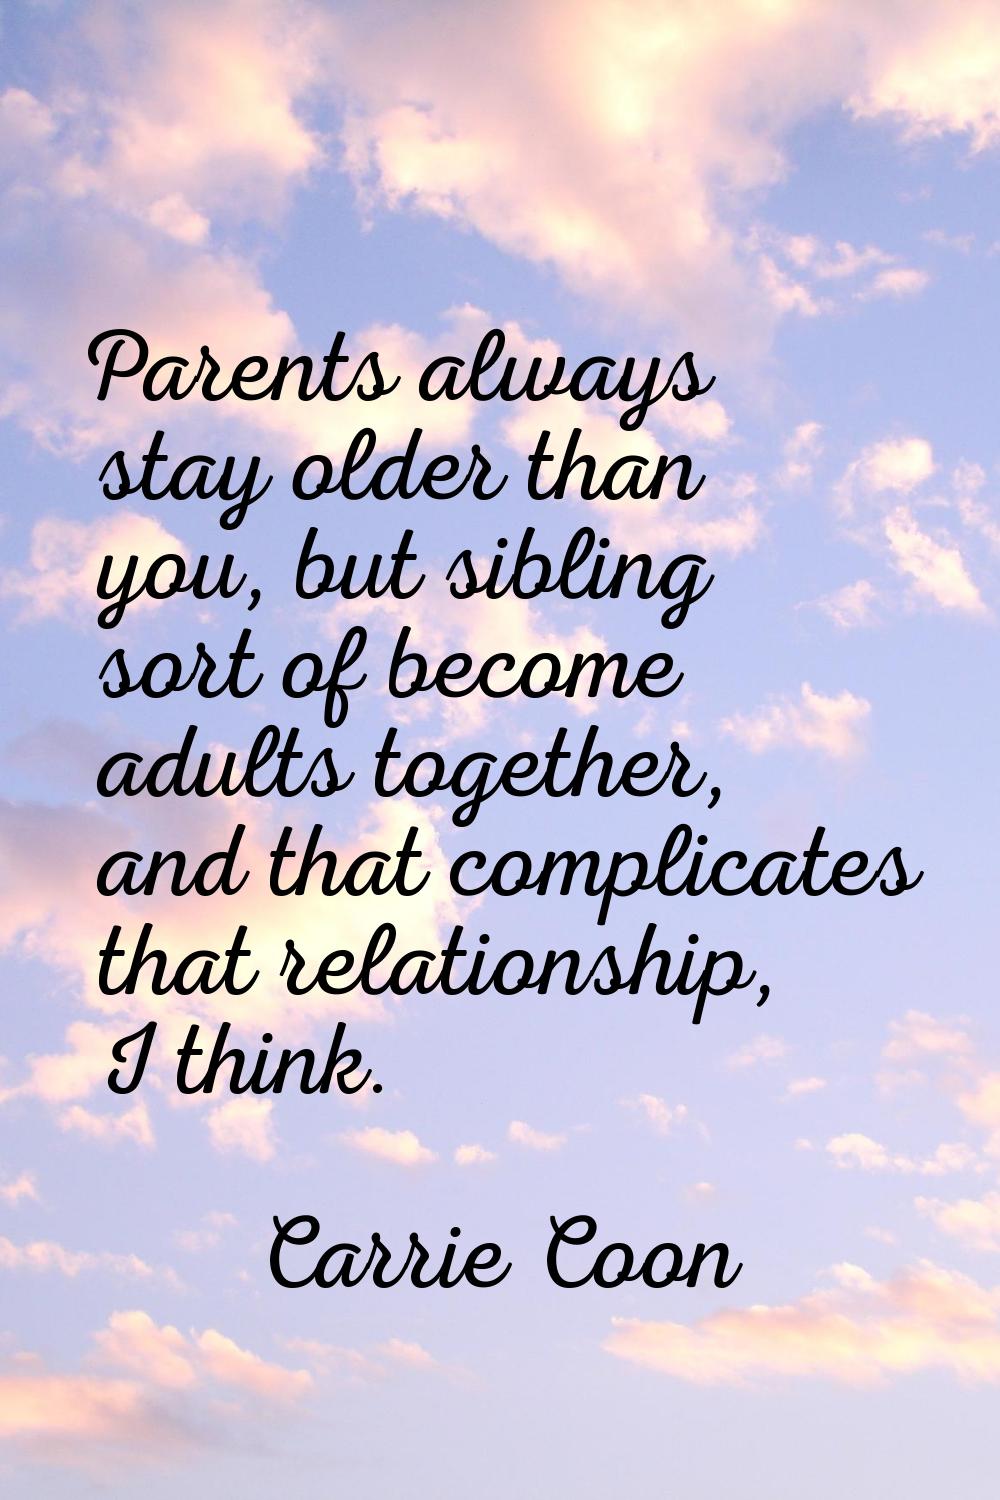 Parents always stay older than you, but sibling sort of become adults together, and that complicate